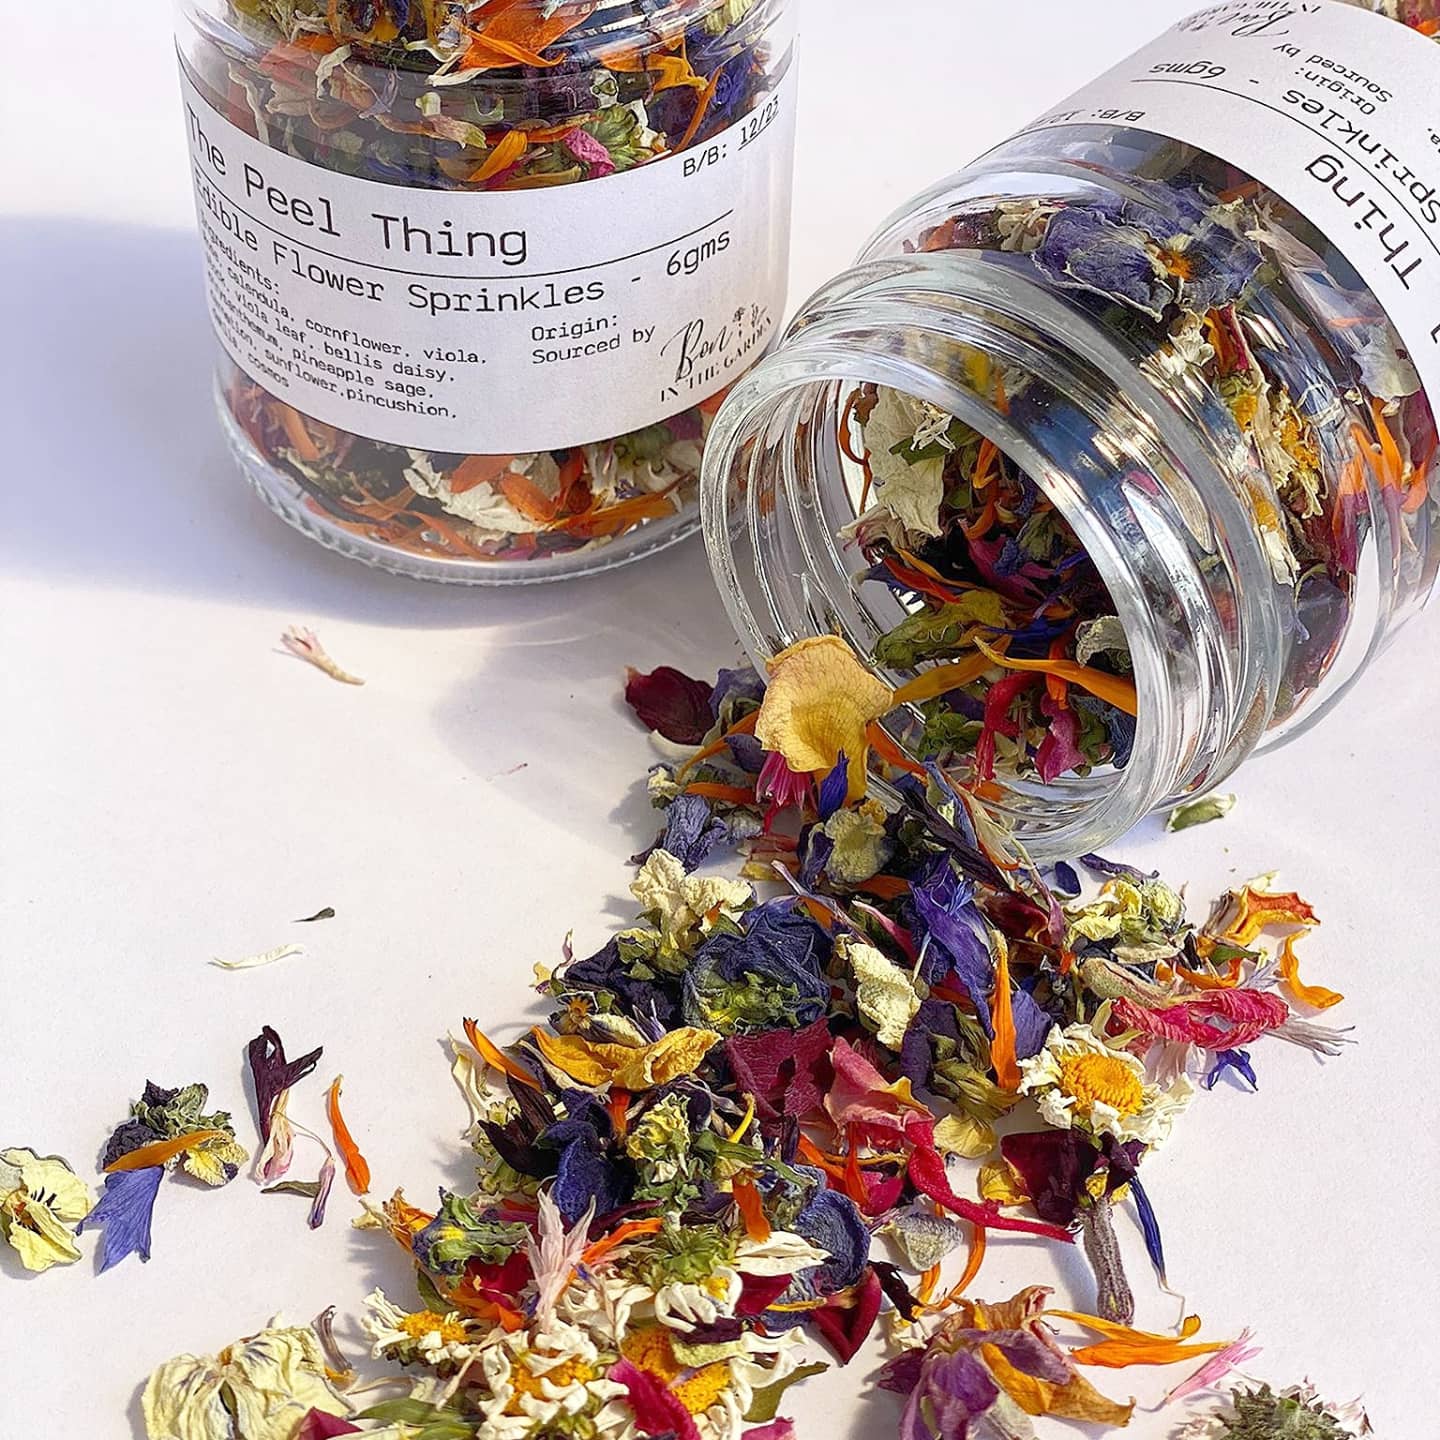 Dried Mix Edible Flowers, Rainbow Mix, Dried Rose Petals, Mix